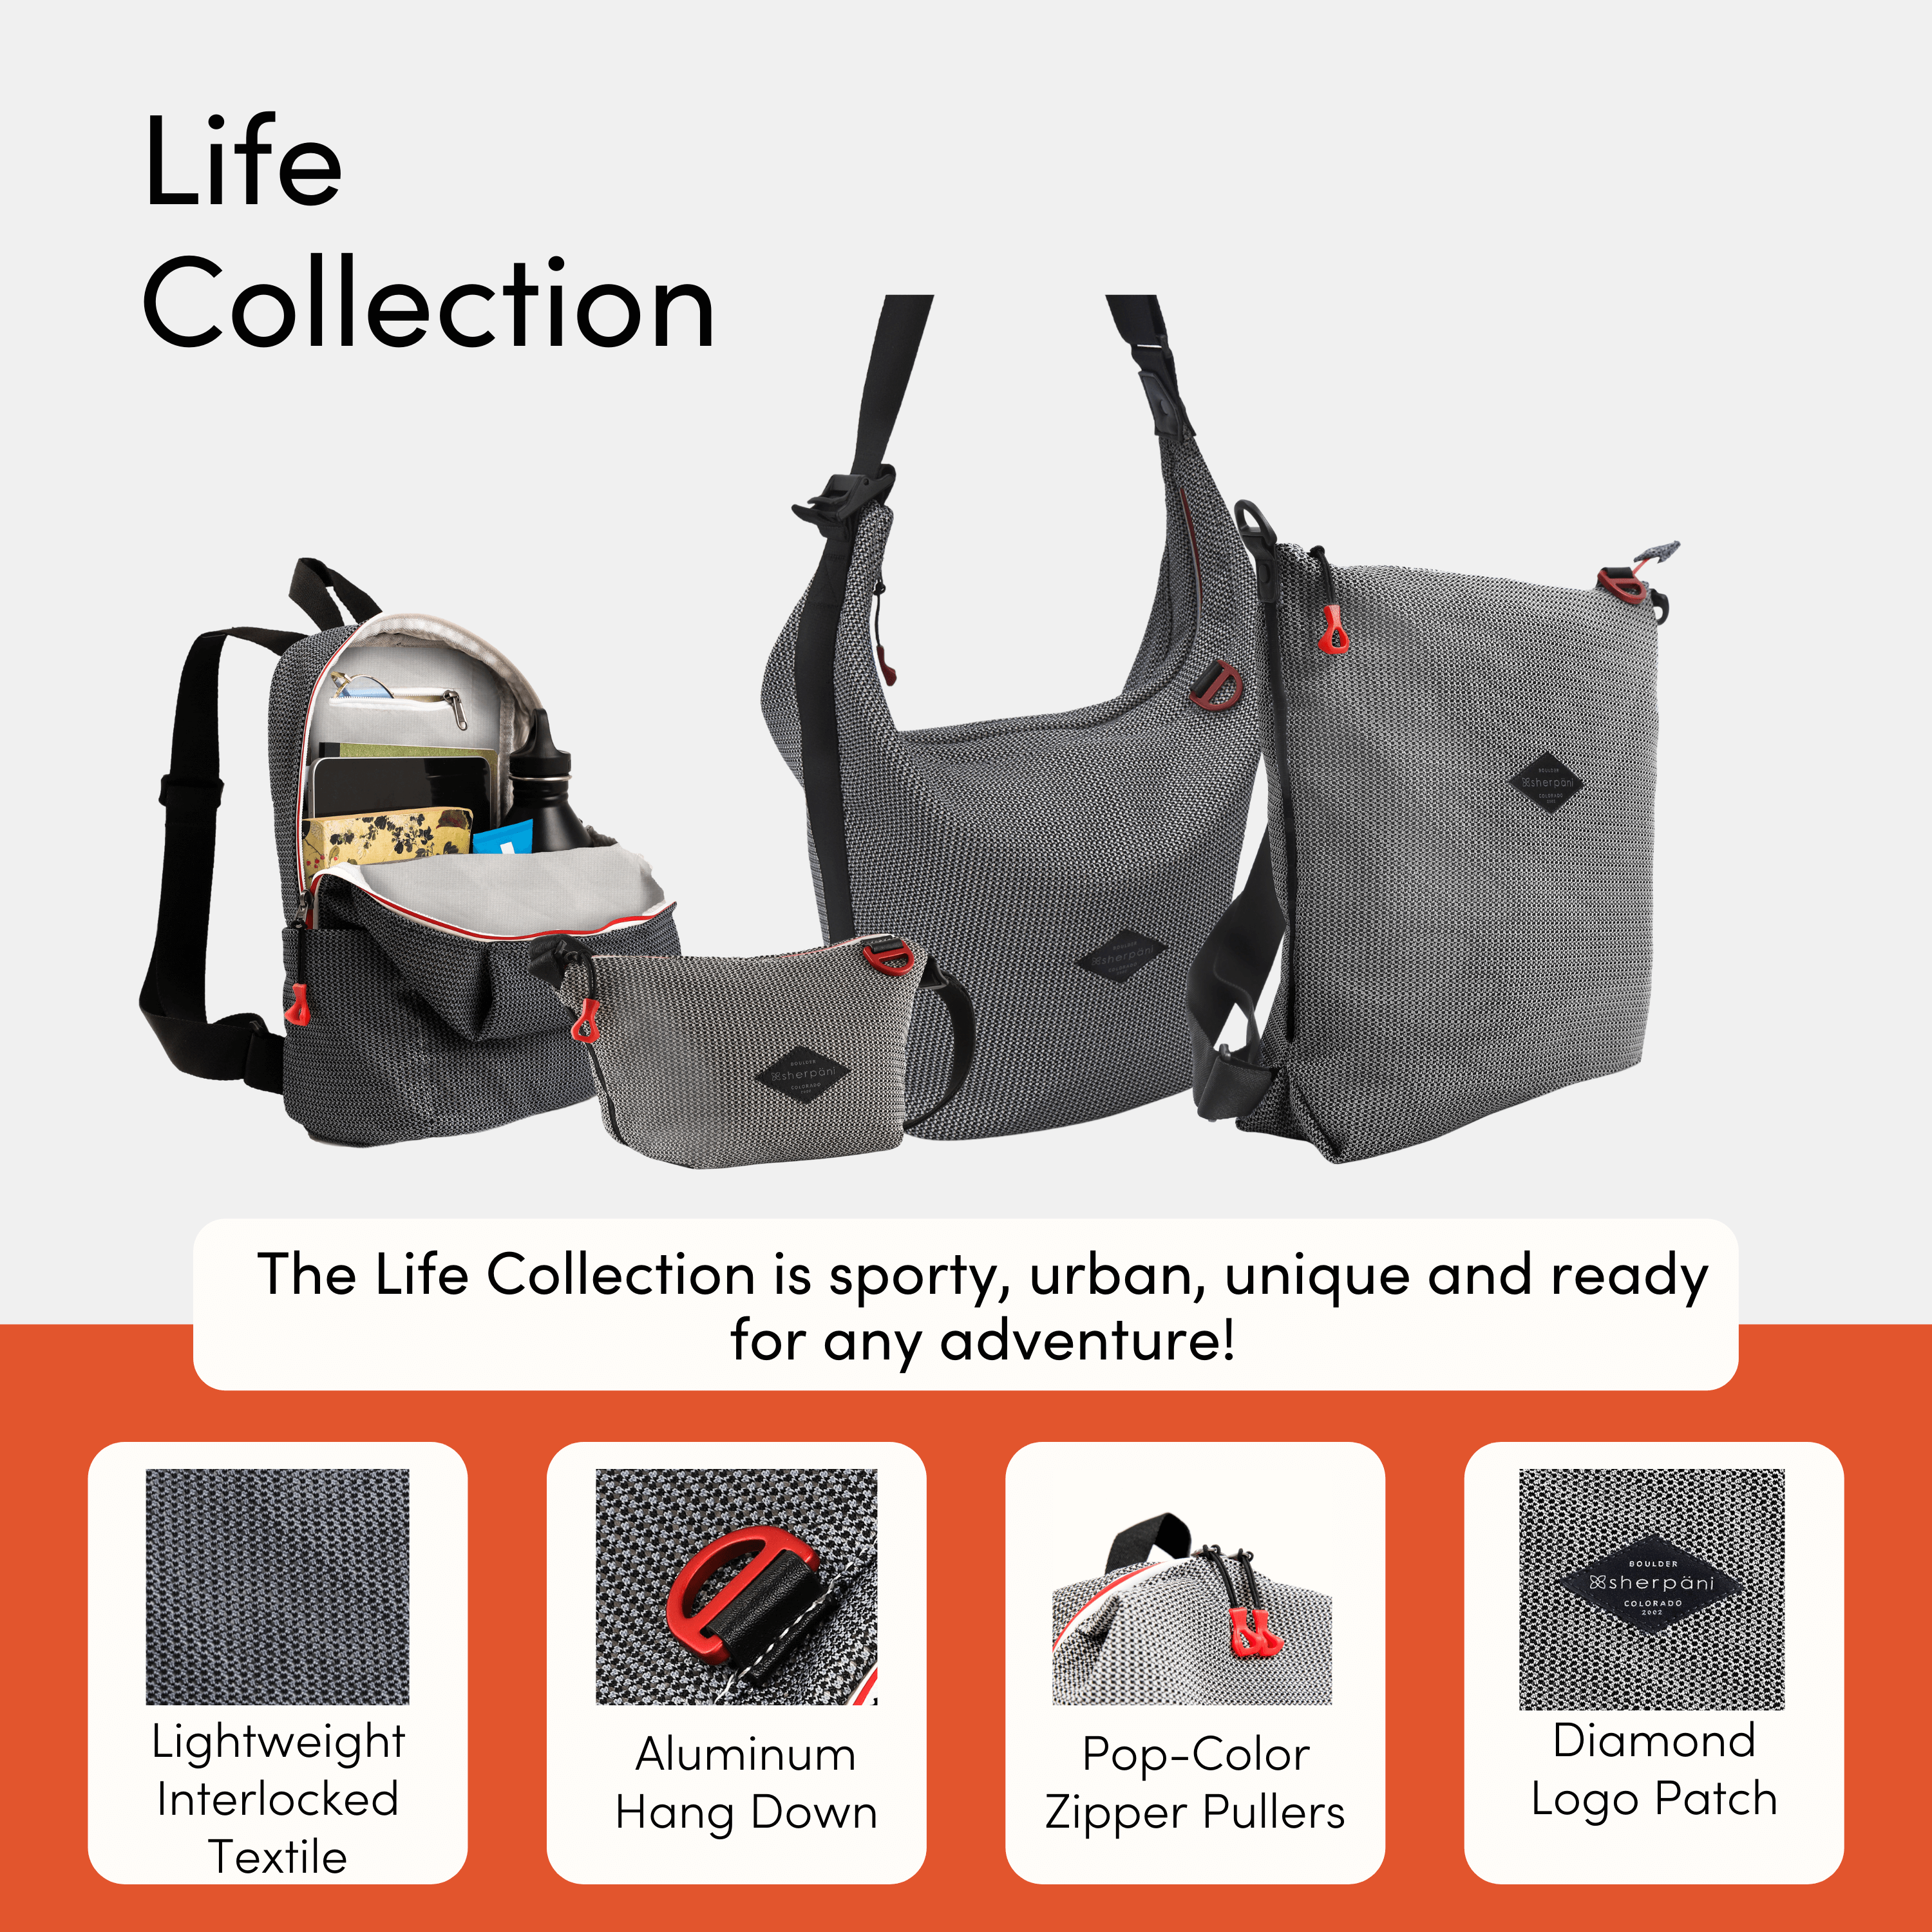 Photo showing the four mesh bags in Sherpani&#39;s Life Collection. The Adaline, the Demi, the Payton and the Delanie. Black text reads &quot;The Life Collection is sporty, urban, unique and ready for any adventure!&quot; Underneath, photos accompanied by black text showcase the following features: Lightweight Interlocked Textile, Aluminum Hang Down, Pop-Color Zipper Pullers, Diamond Logo Patch.